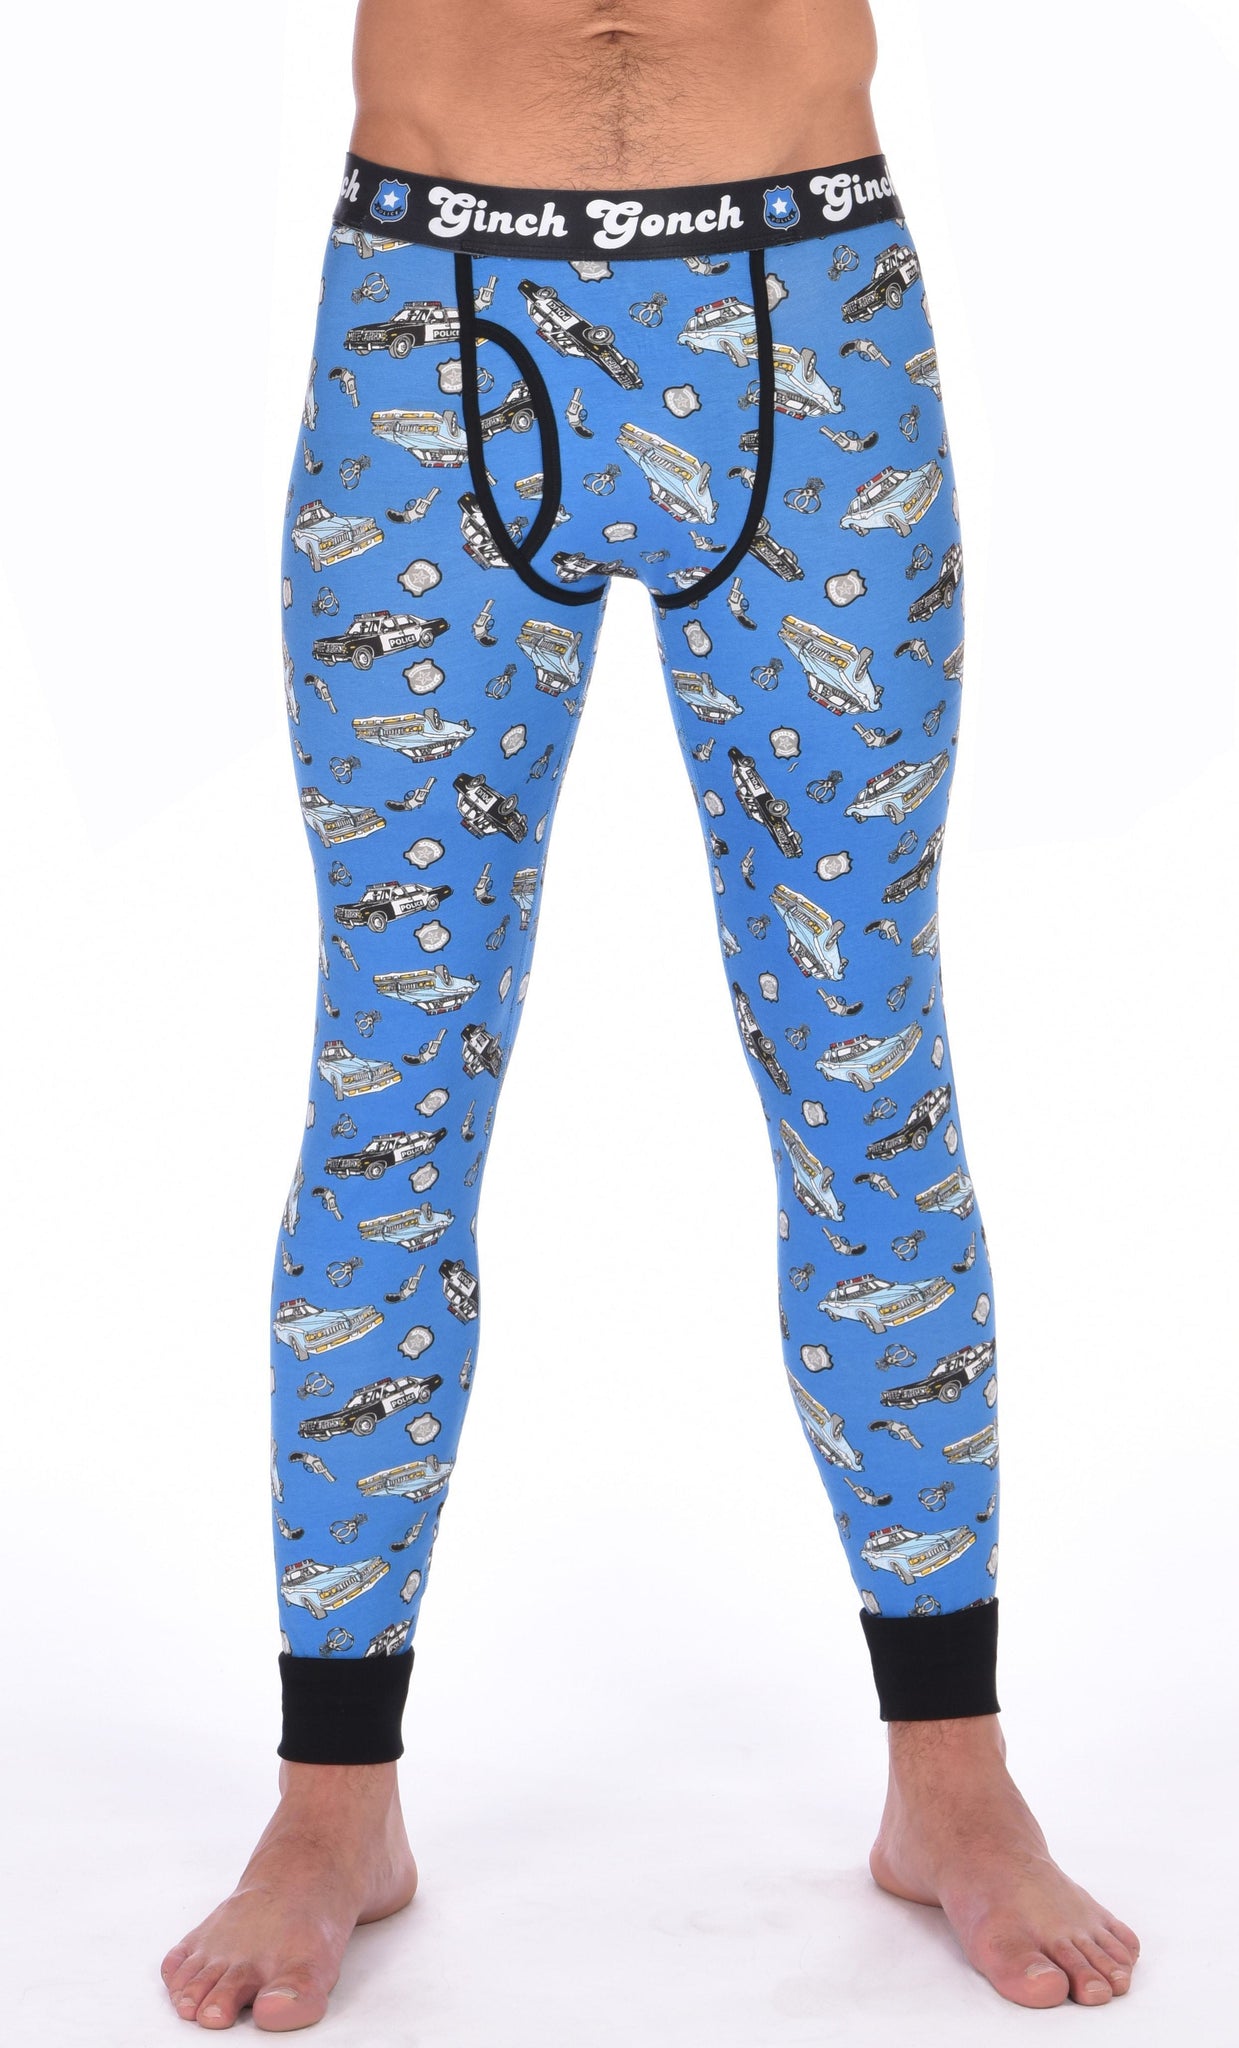 Ginch Gonch GG Patrol long john legging men's long underwear y front blue fabric with cop cars, badges, hand cuffs, and guns. Black trim and black printed waistband front. 